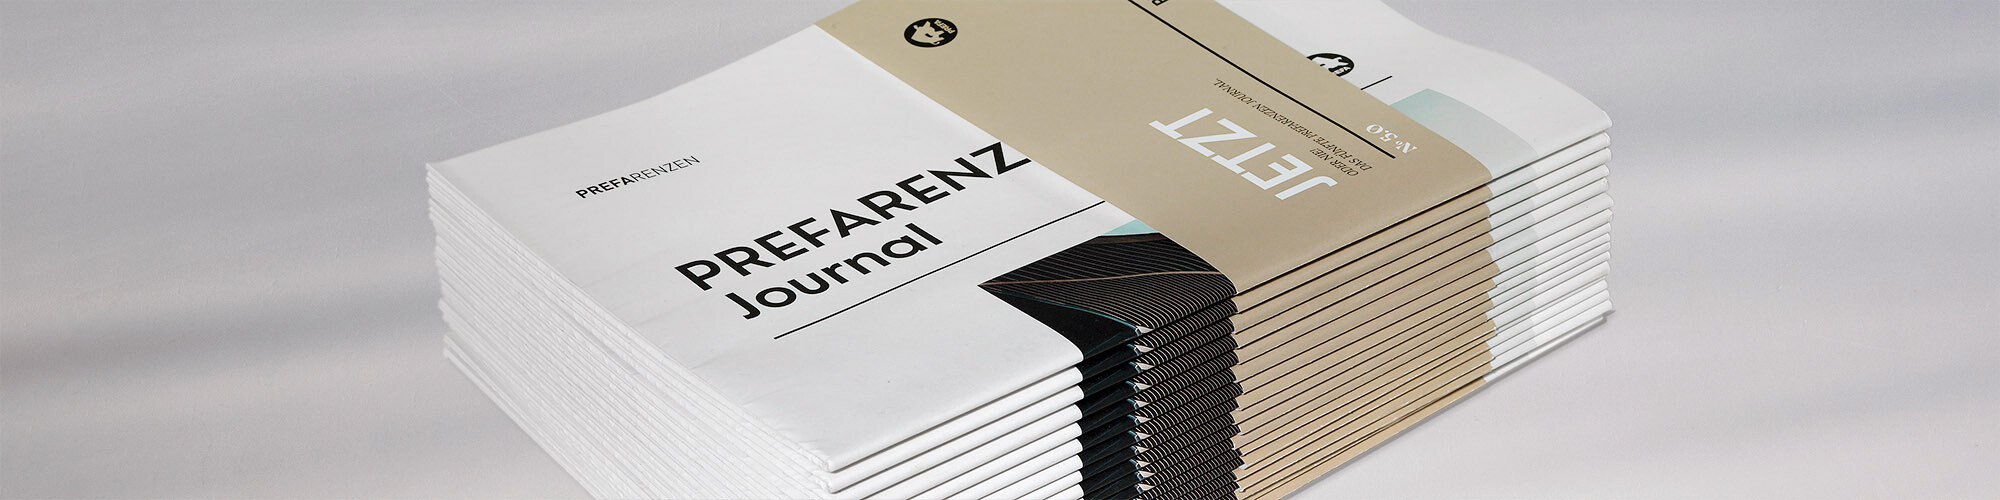 Side view of a stack of PREFARENZEN journals with the light ochre banderole that reads: "Now or never!"